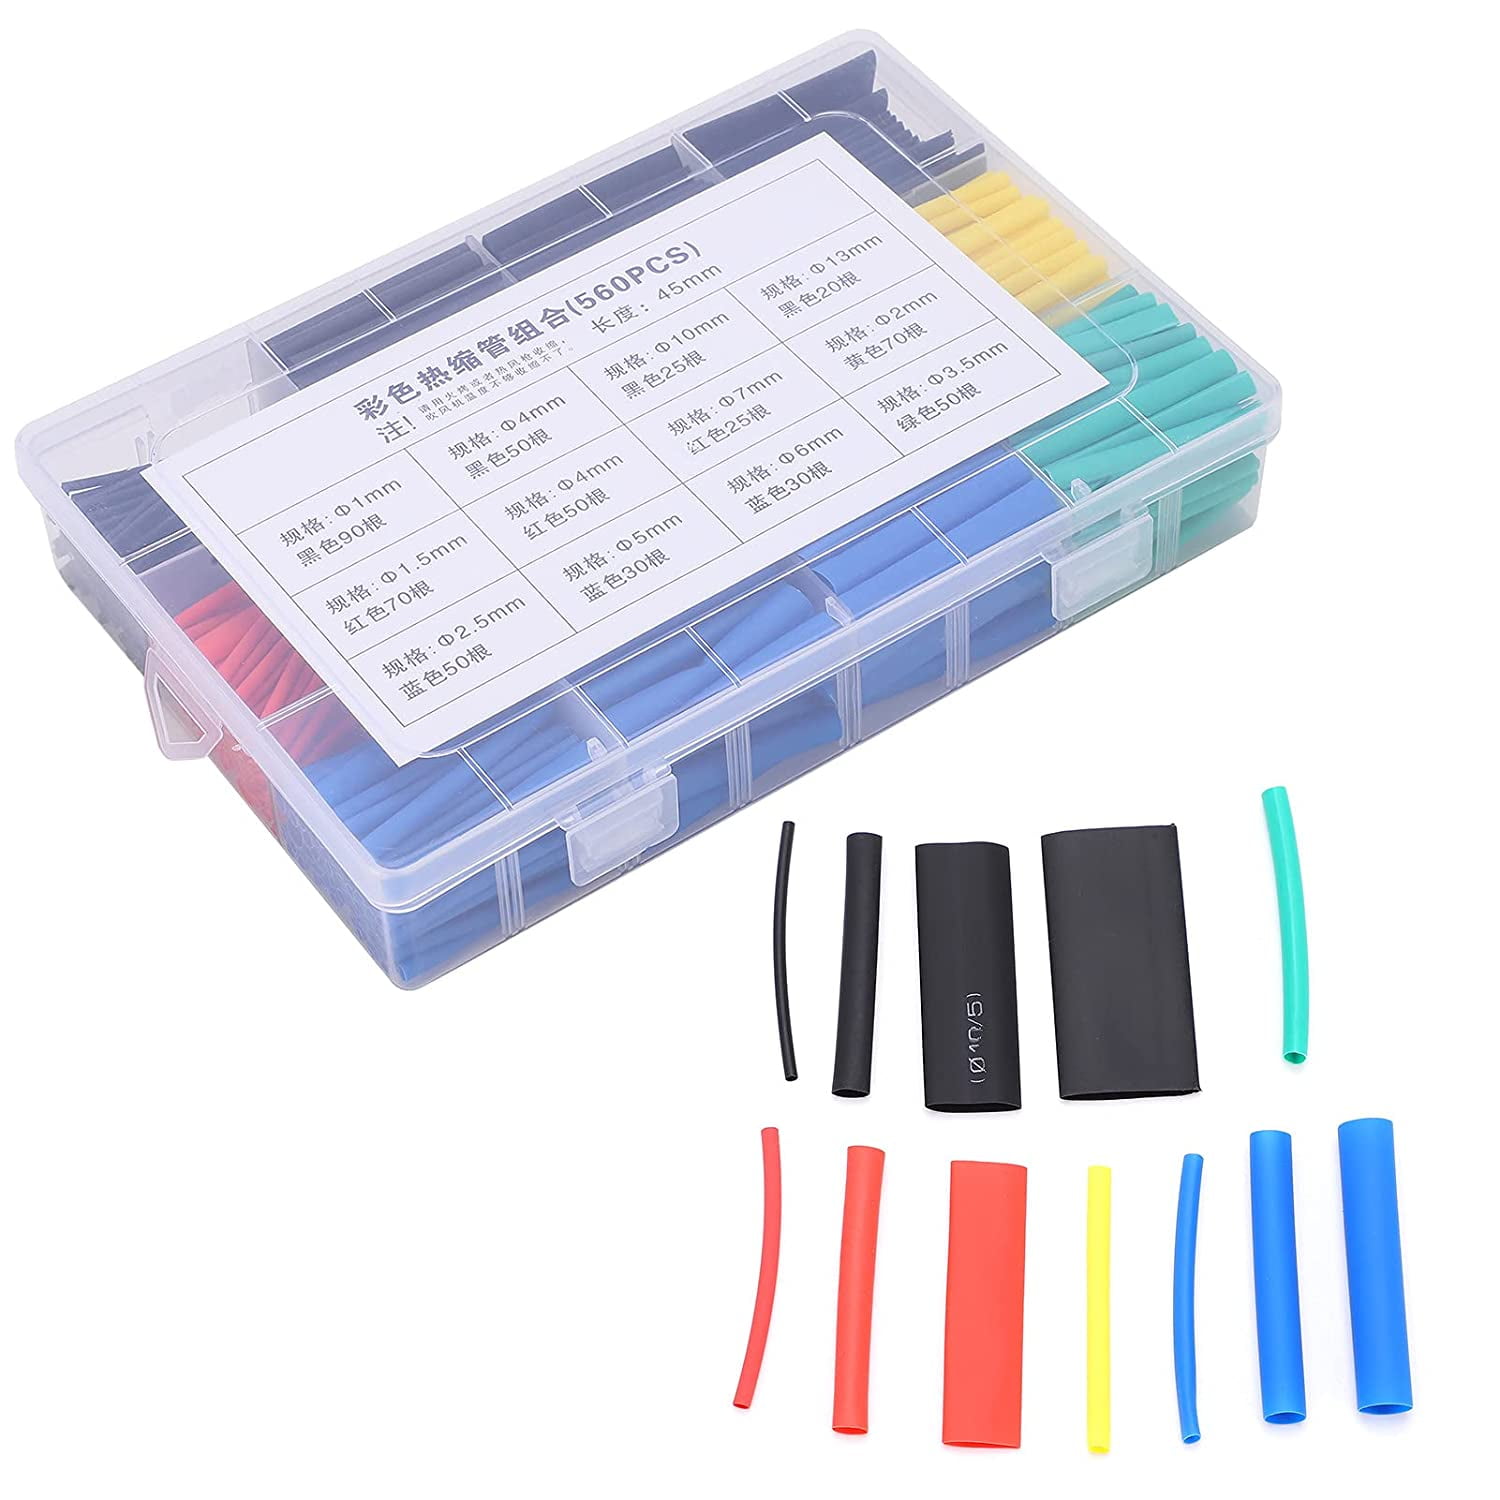 560PCS Heat Shrink Tubing Sevensun 2:1 Dual Wall Adhesive Heat Shrink Tubes Wire Wrap 5 colors/12 Sizes Waterproof and Insulated Electrical Wire Heat Shrink Tube Kit with Box